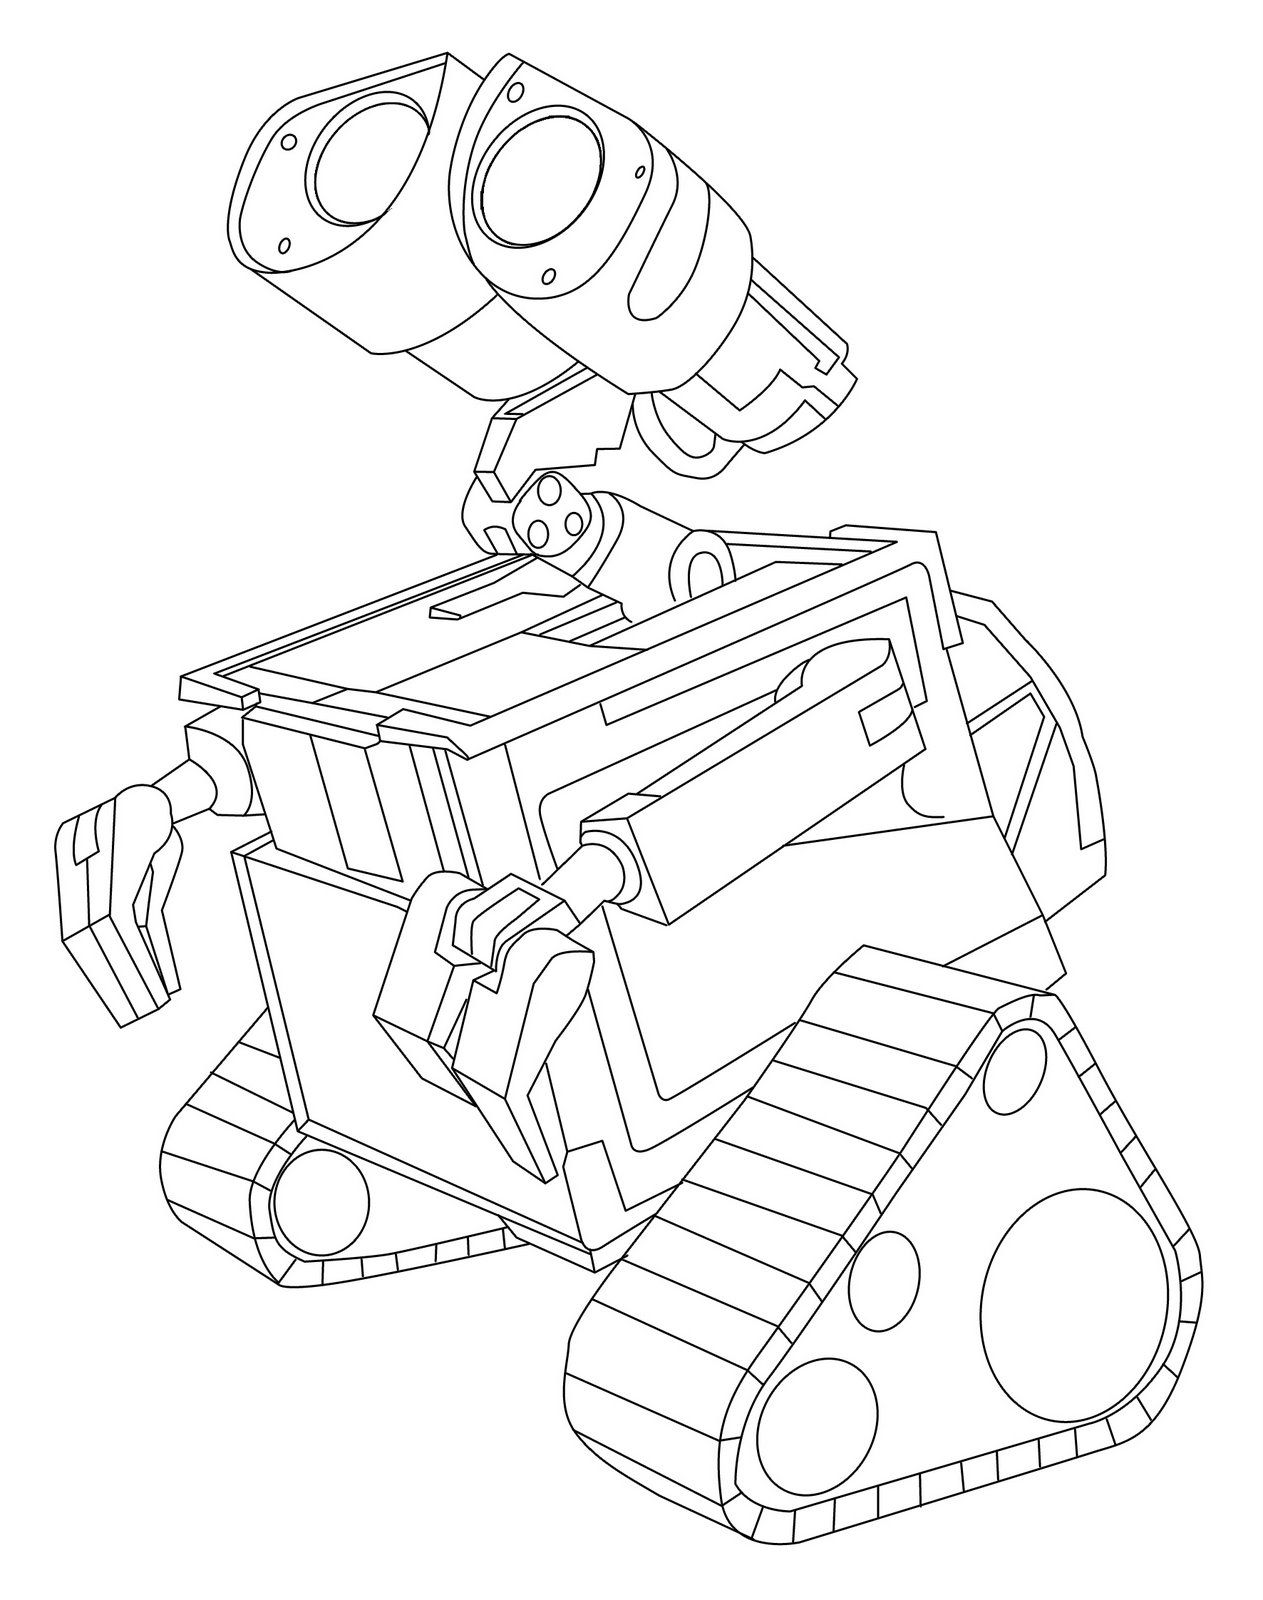 WALL-E Coloring Pages - Best Coloring Pages For Kids